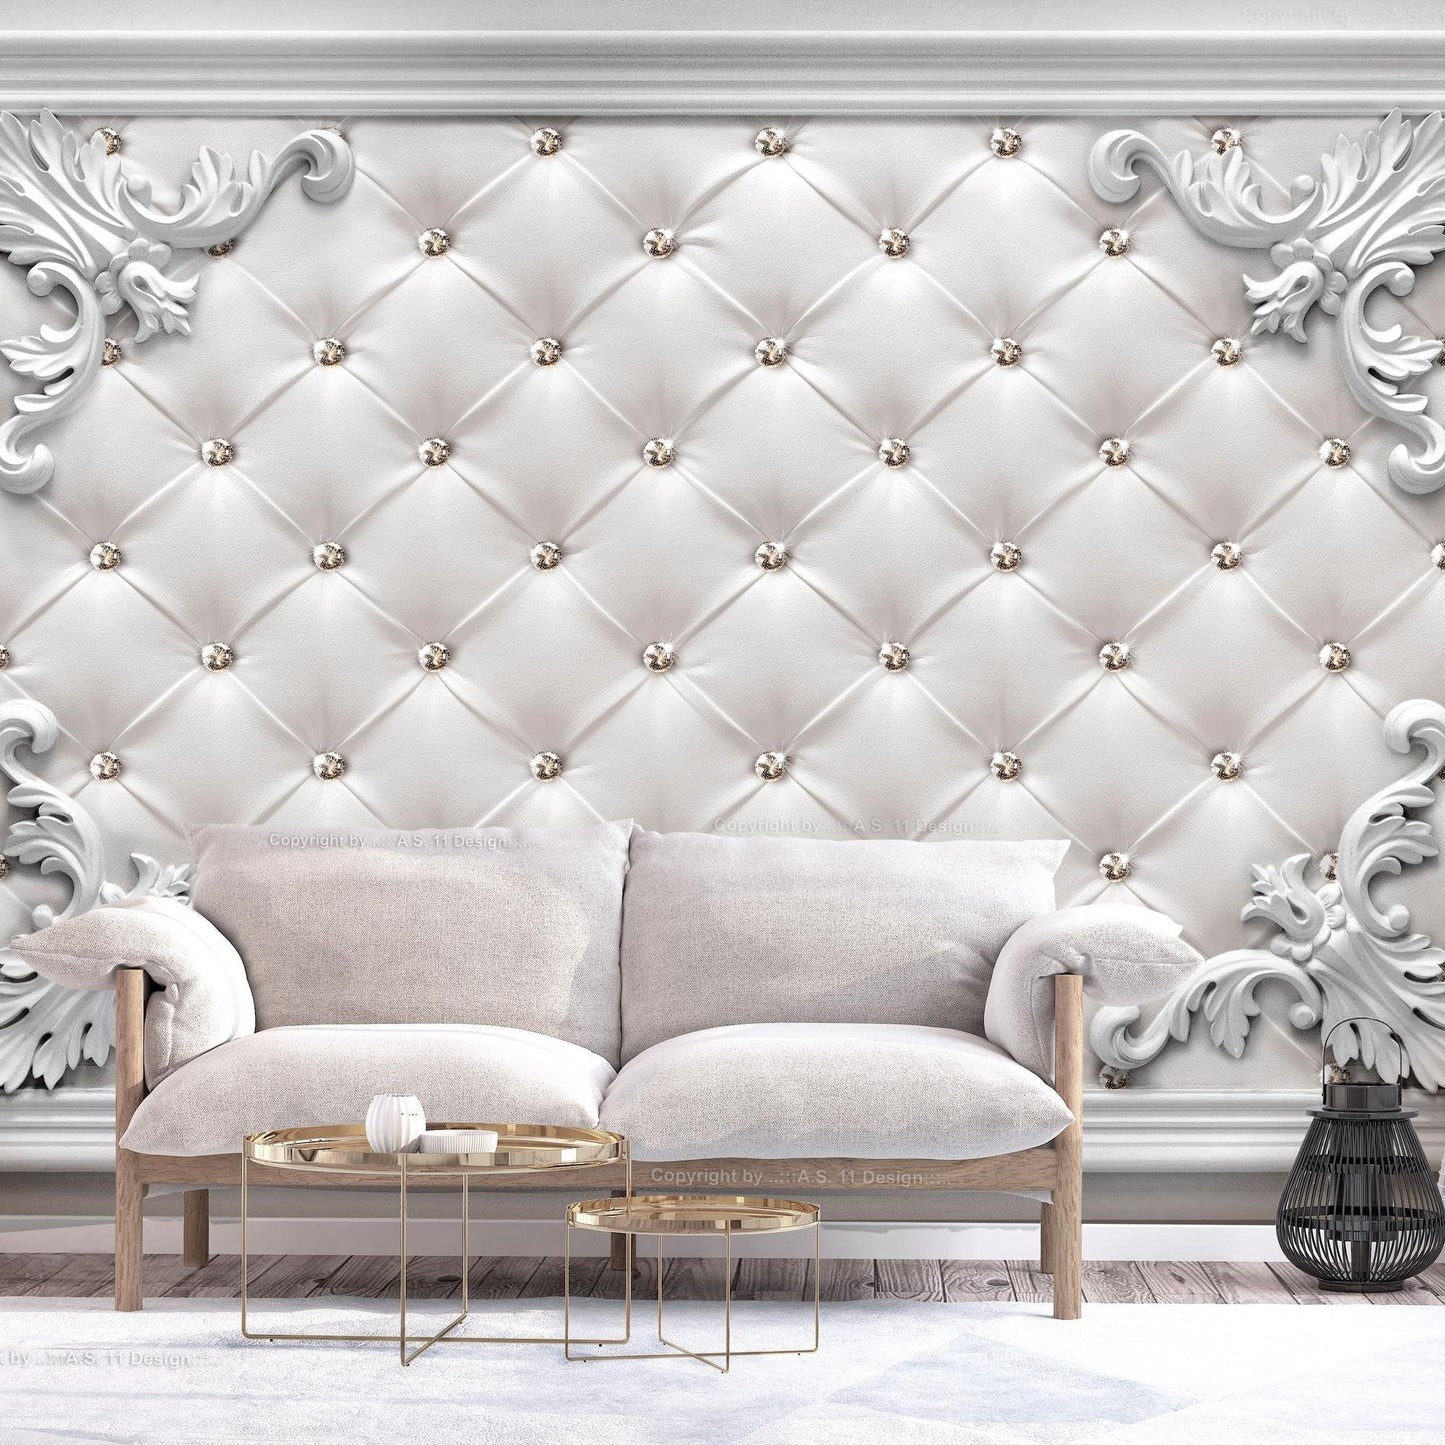 Peel and stick wall mural - Quilted Leather - www.trendingbestsellers.com